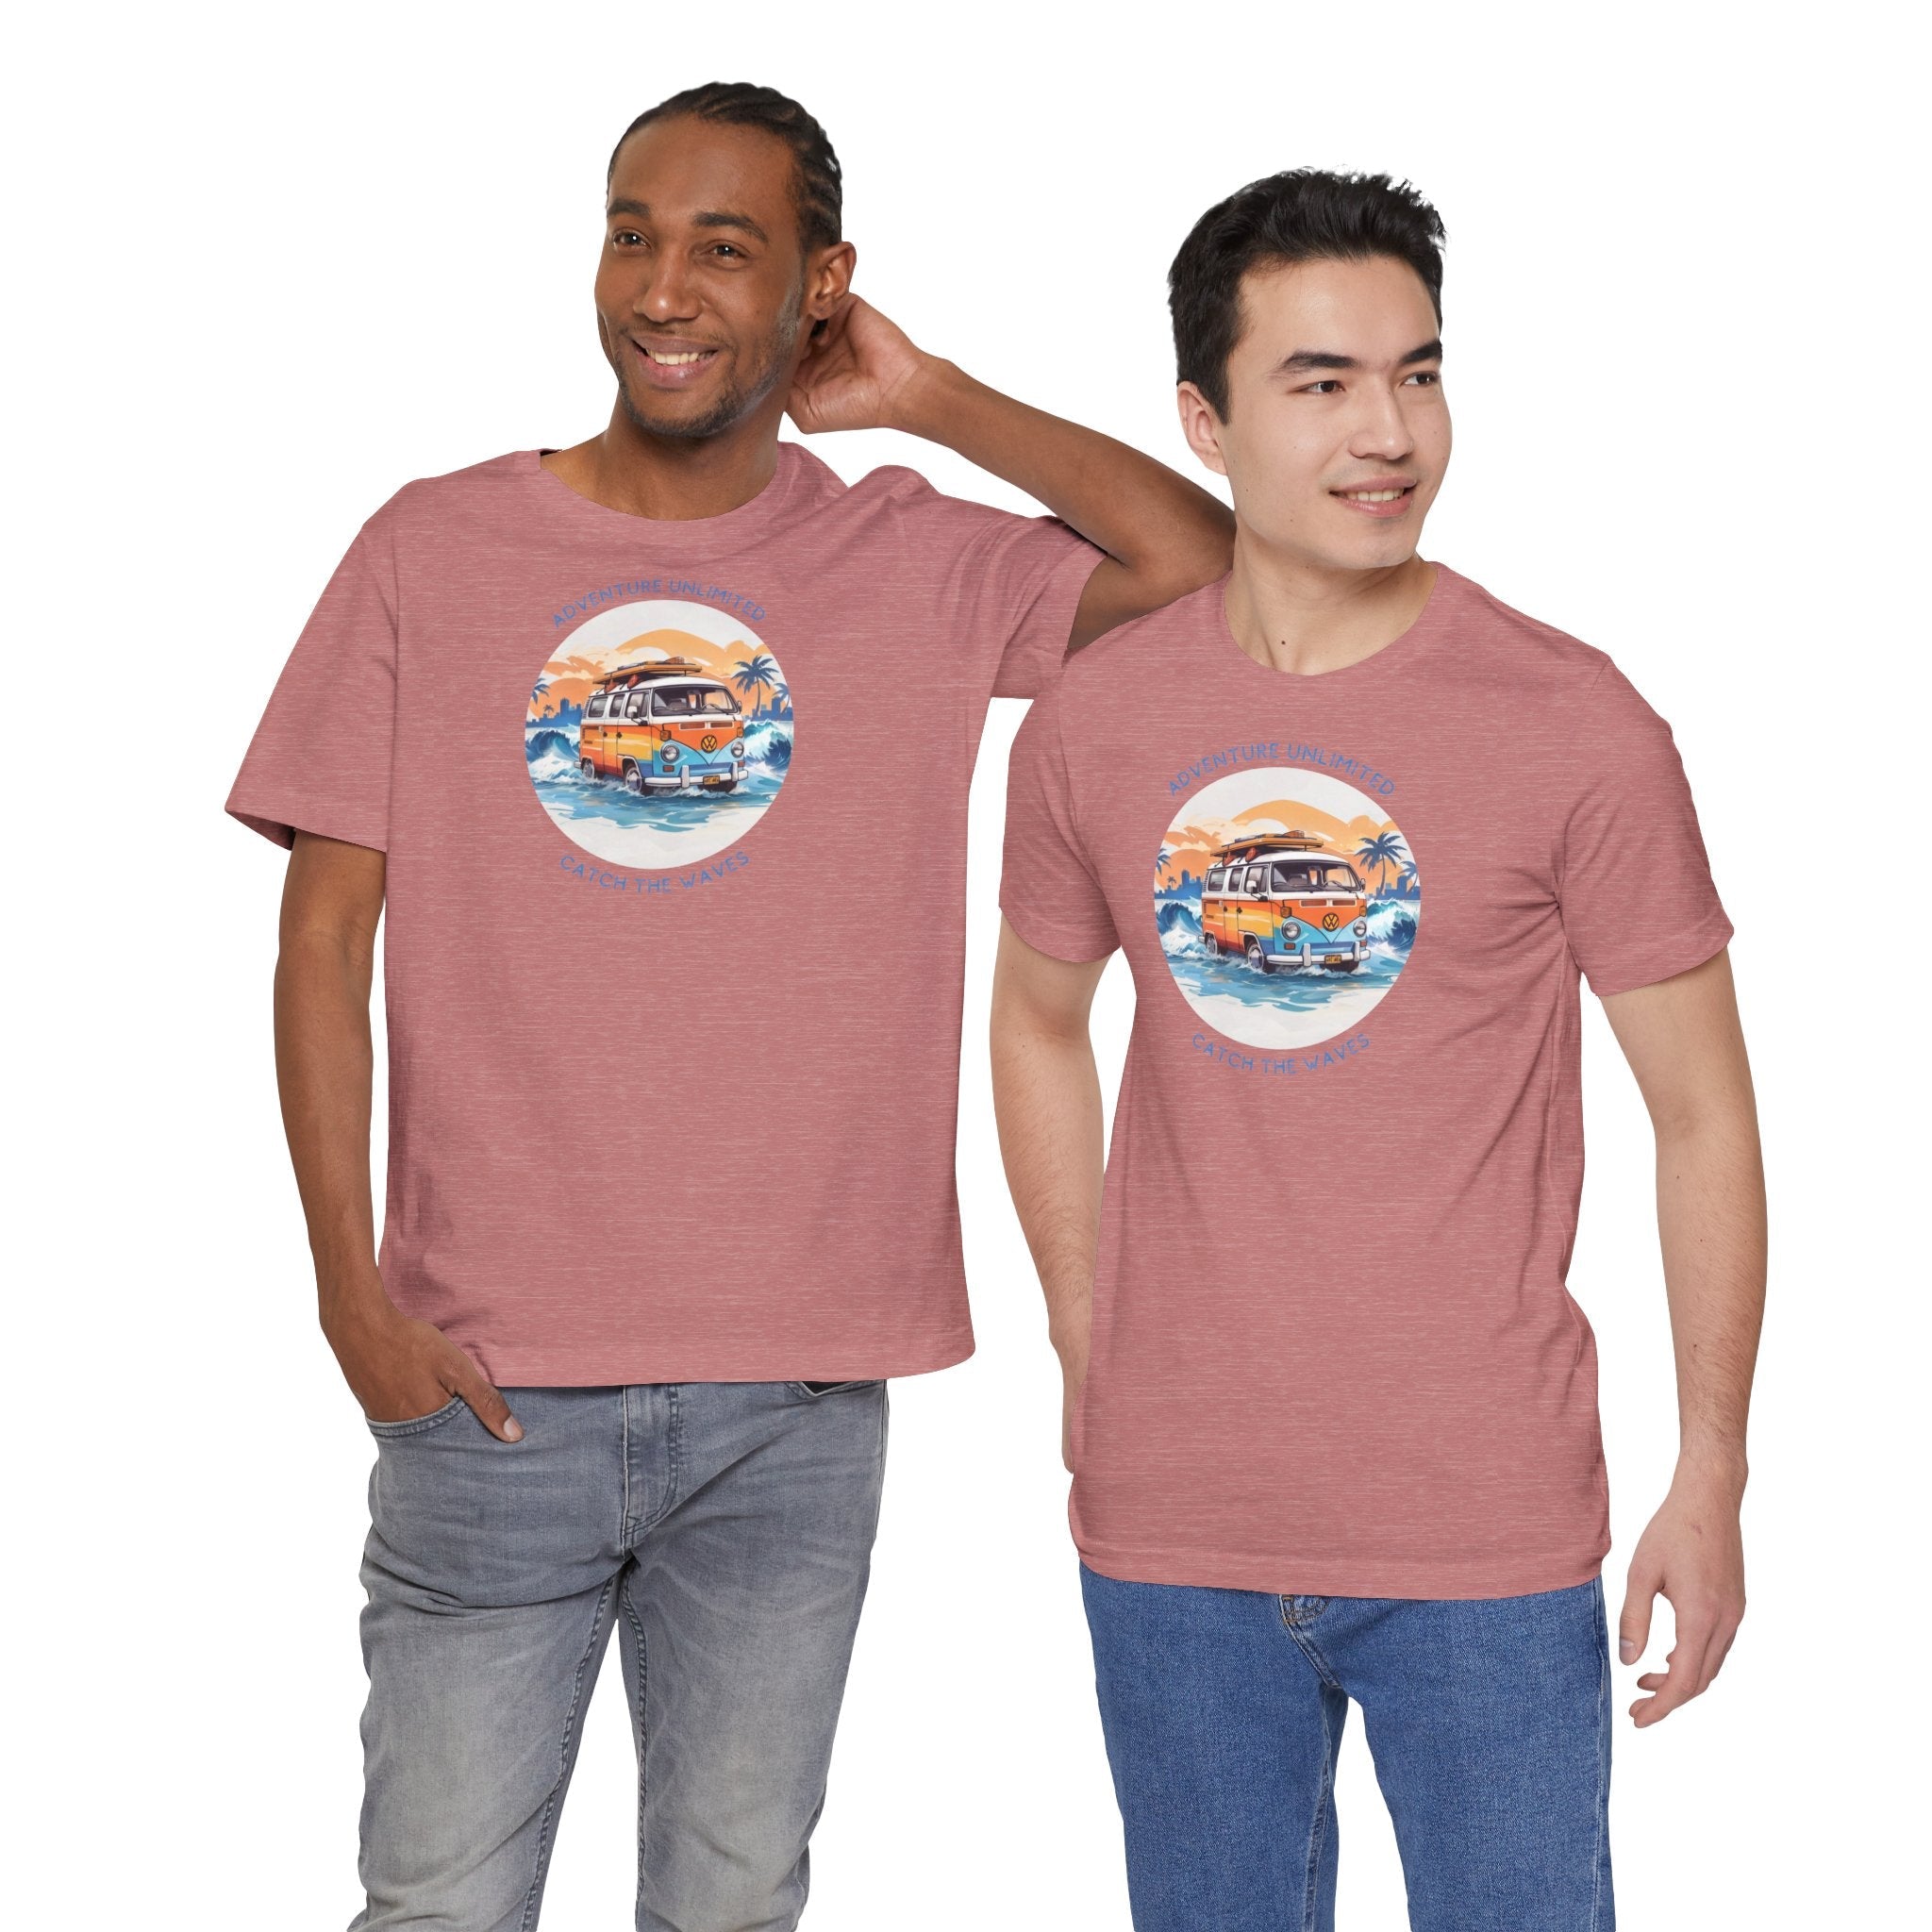 Adventure Unlimited Surfing T-Shirts with ’The Beach’ printed on two men